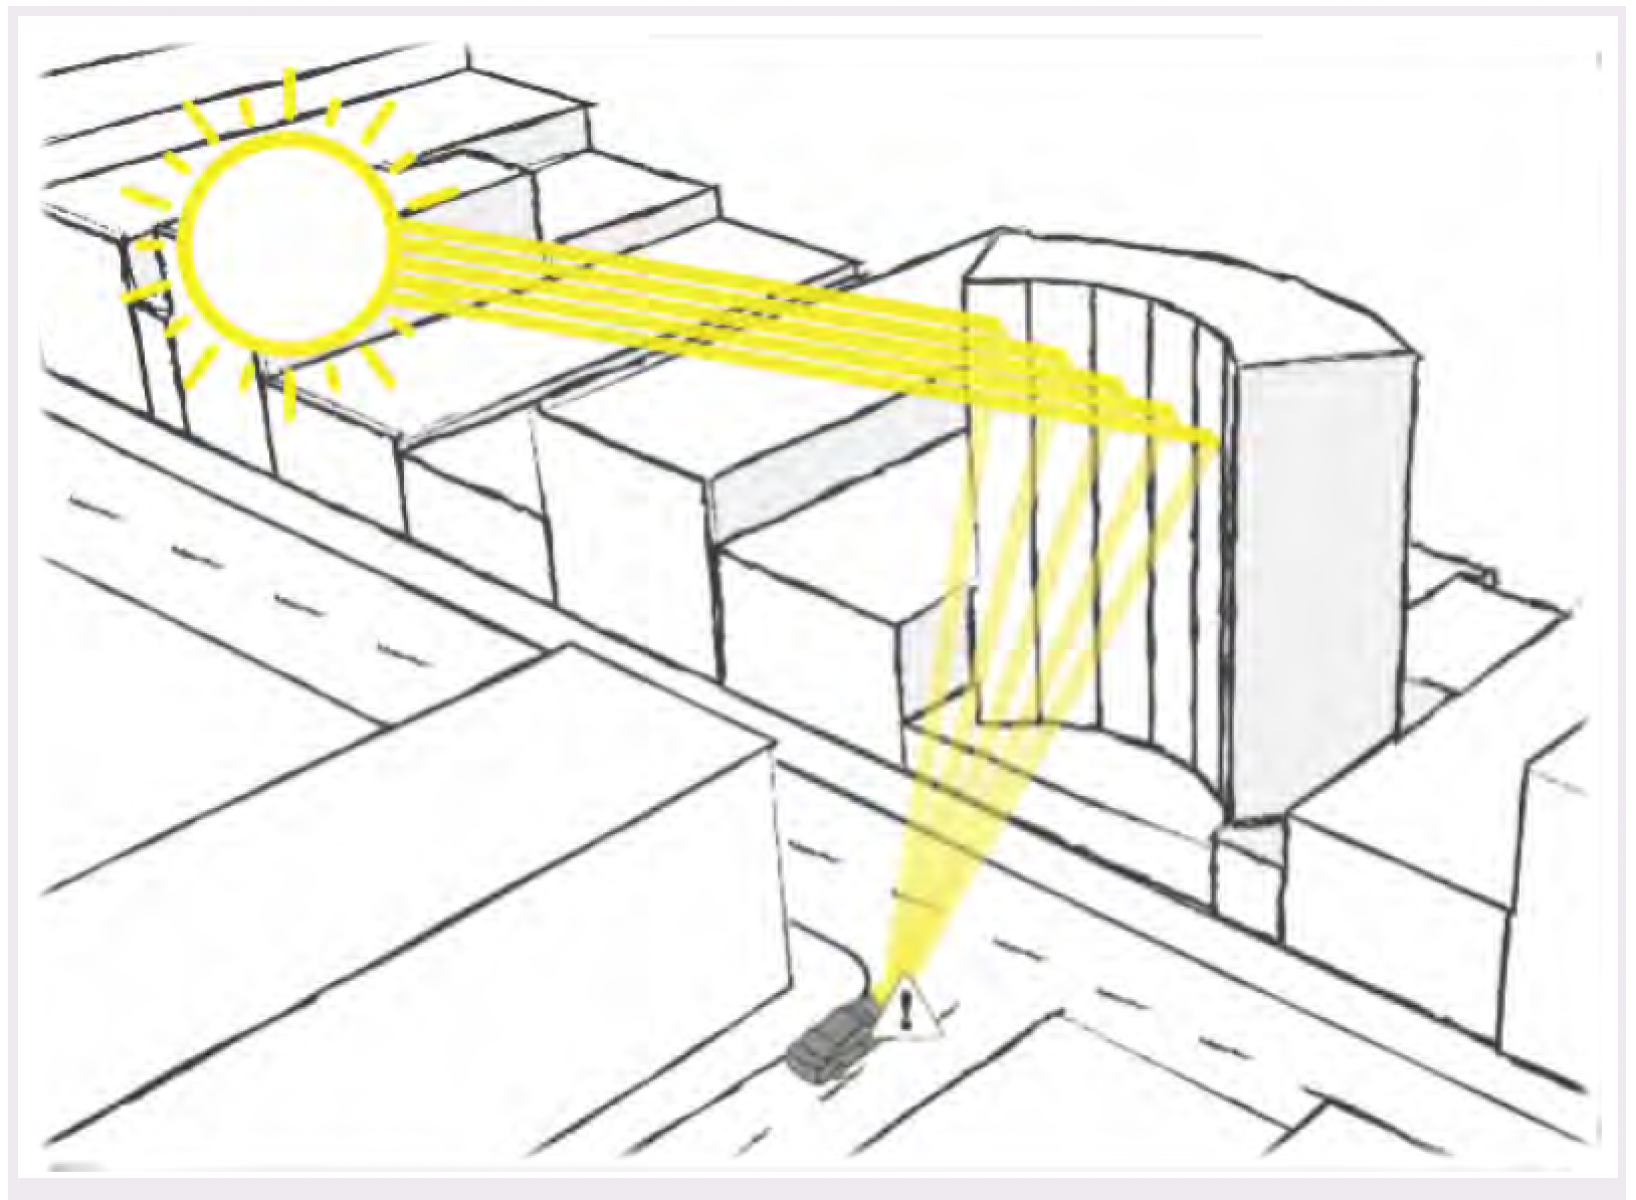 Reflected glare risk is greater for concave curvature or faceting on façades.